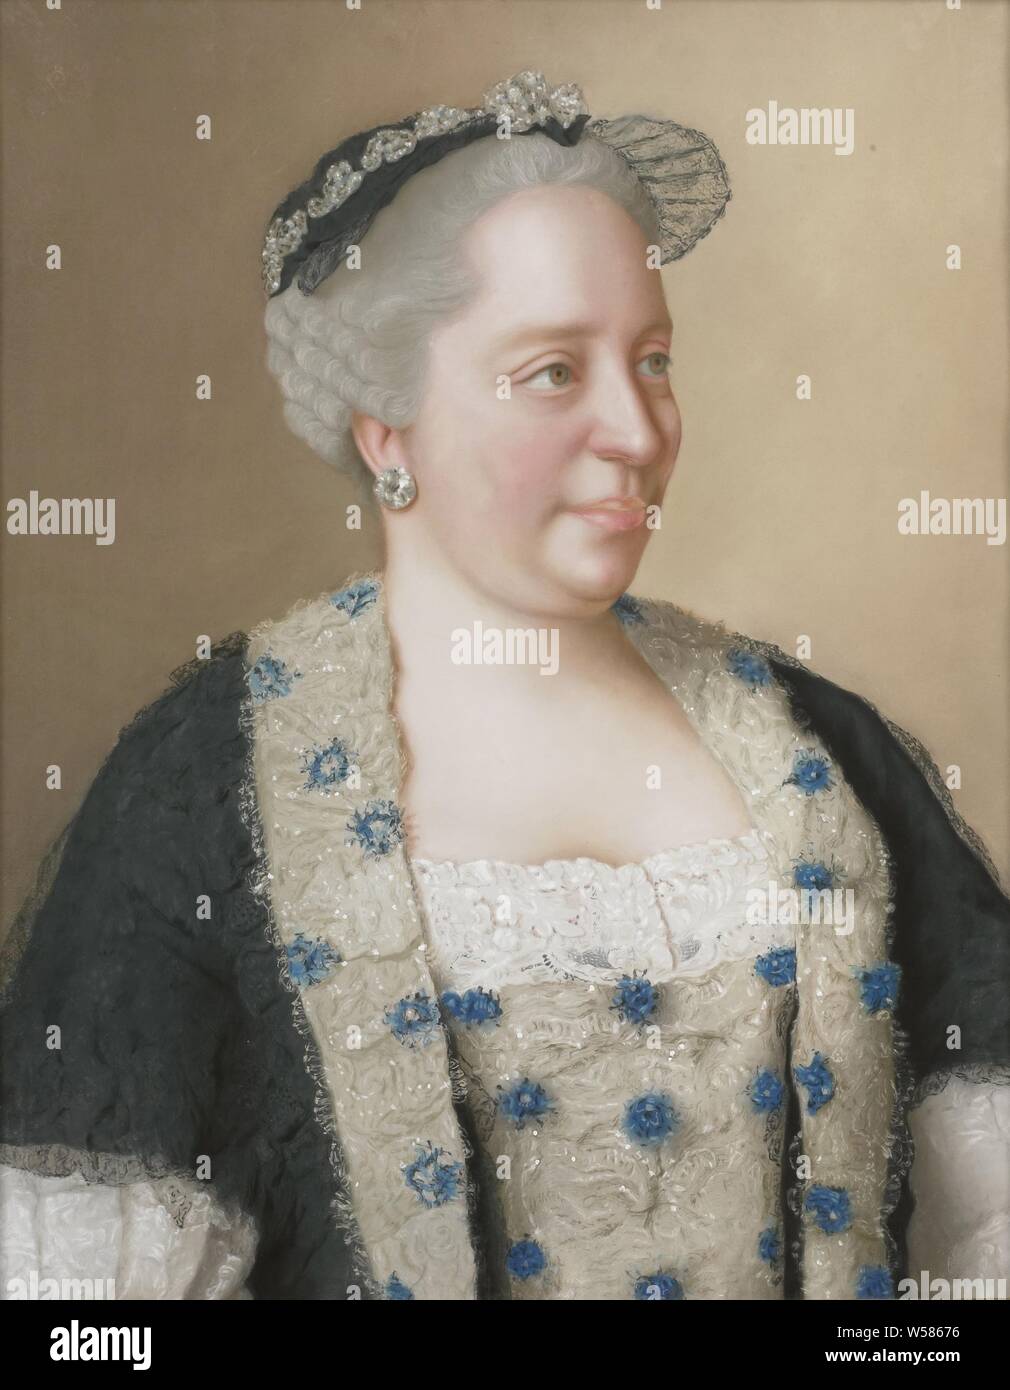 Maria Theresia of Austria (1717-80), Archduchess of Austria, Queen of Hungary and Bohemia, Roman German Empress, Portrait of Maria Theresia (1717-80), Empress of Austria, Queen of Hungary and Bohemia. Half to the right. Part of the pastels collection, Maria Theresia (Roman-German Empress), Jean-Etienne Liotard, 1762, parchment (animal material), h 62.5 cm × w 50.7 cm w 9.2 kg h 77.5 cm × w 65.6 cm × t 5.2 cm Stock Photo